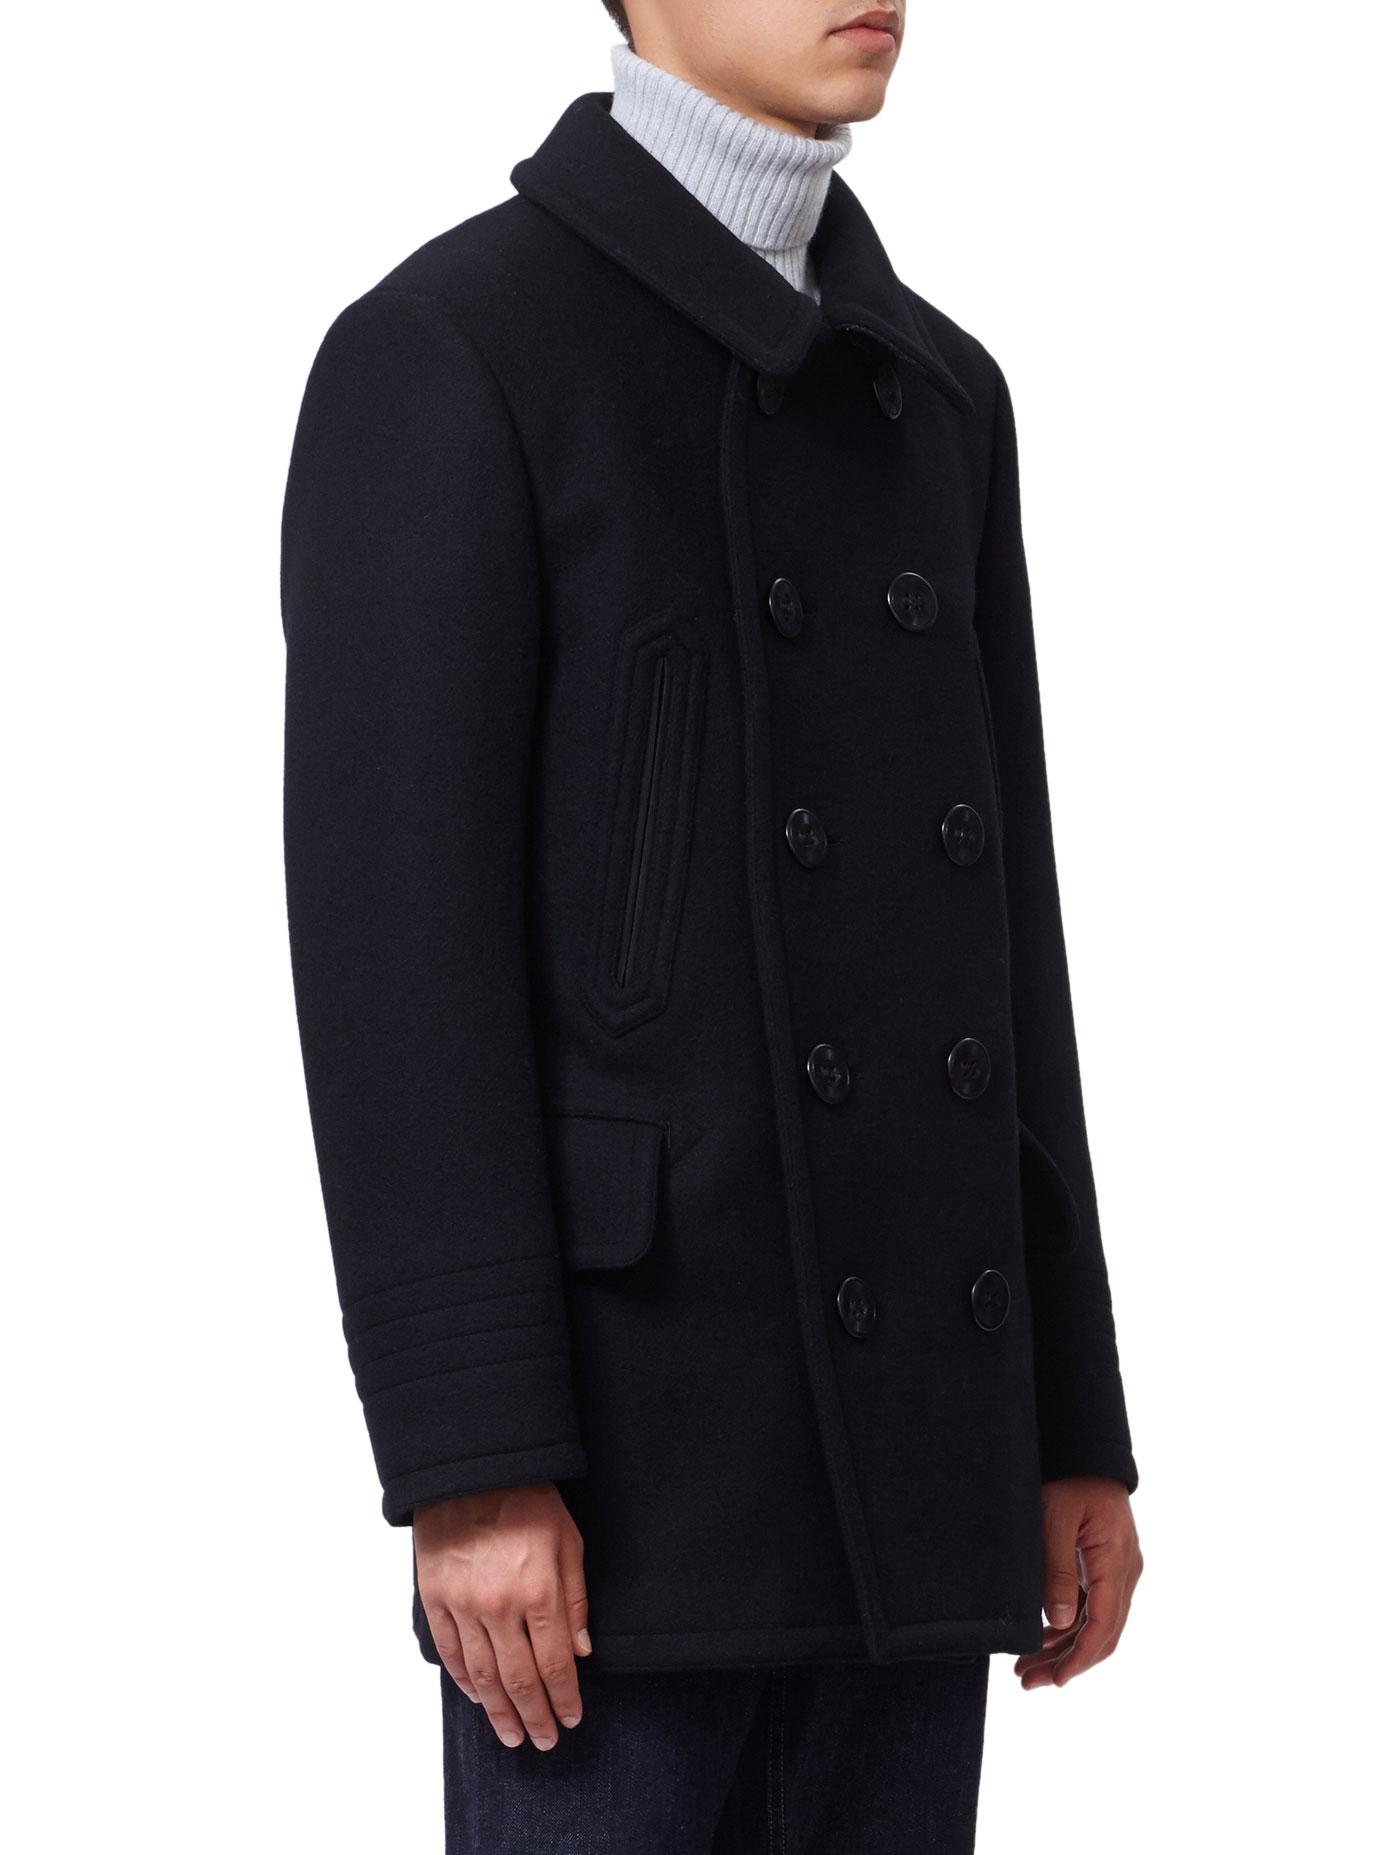 Tom Ford Double-breasted Wool Coat in Black for Men - Lyst